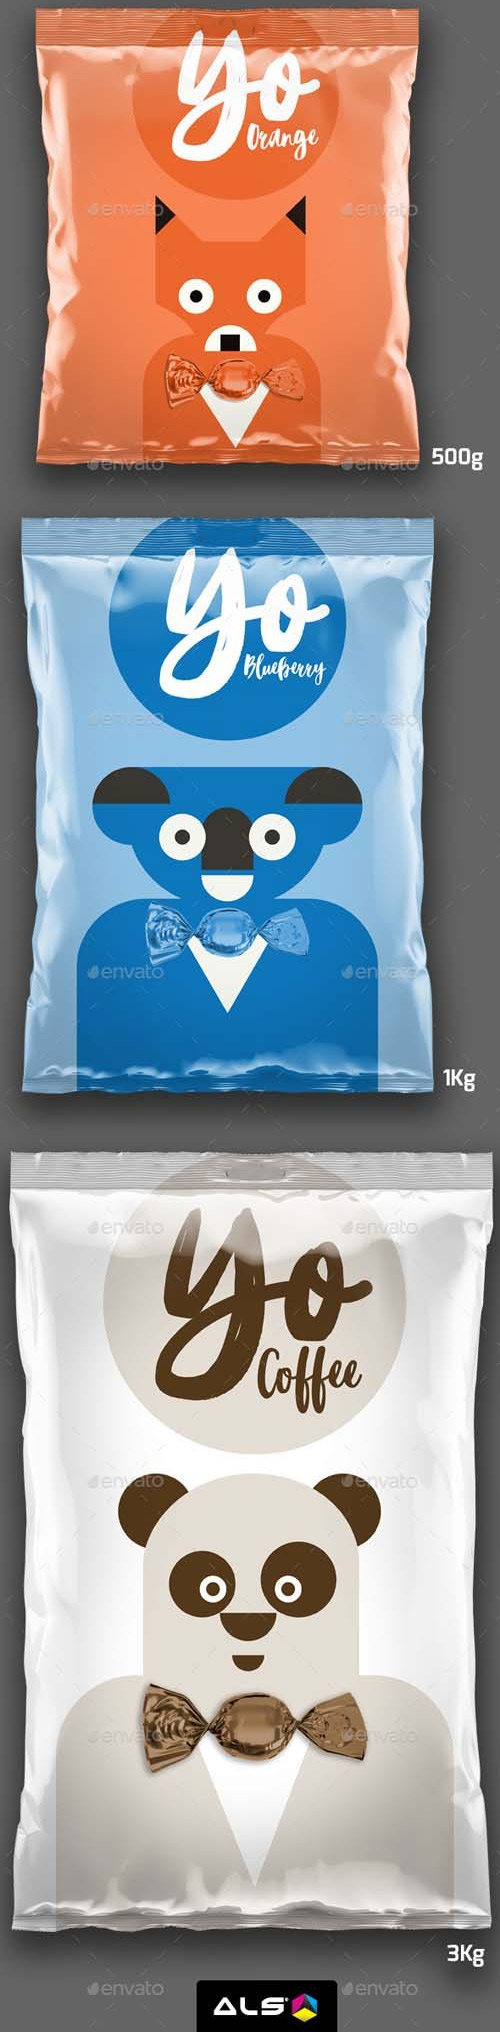 5 Snack Bags Mock-up 19747598